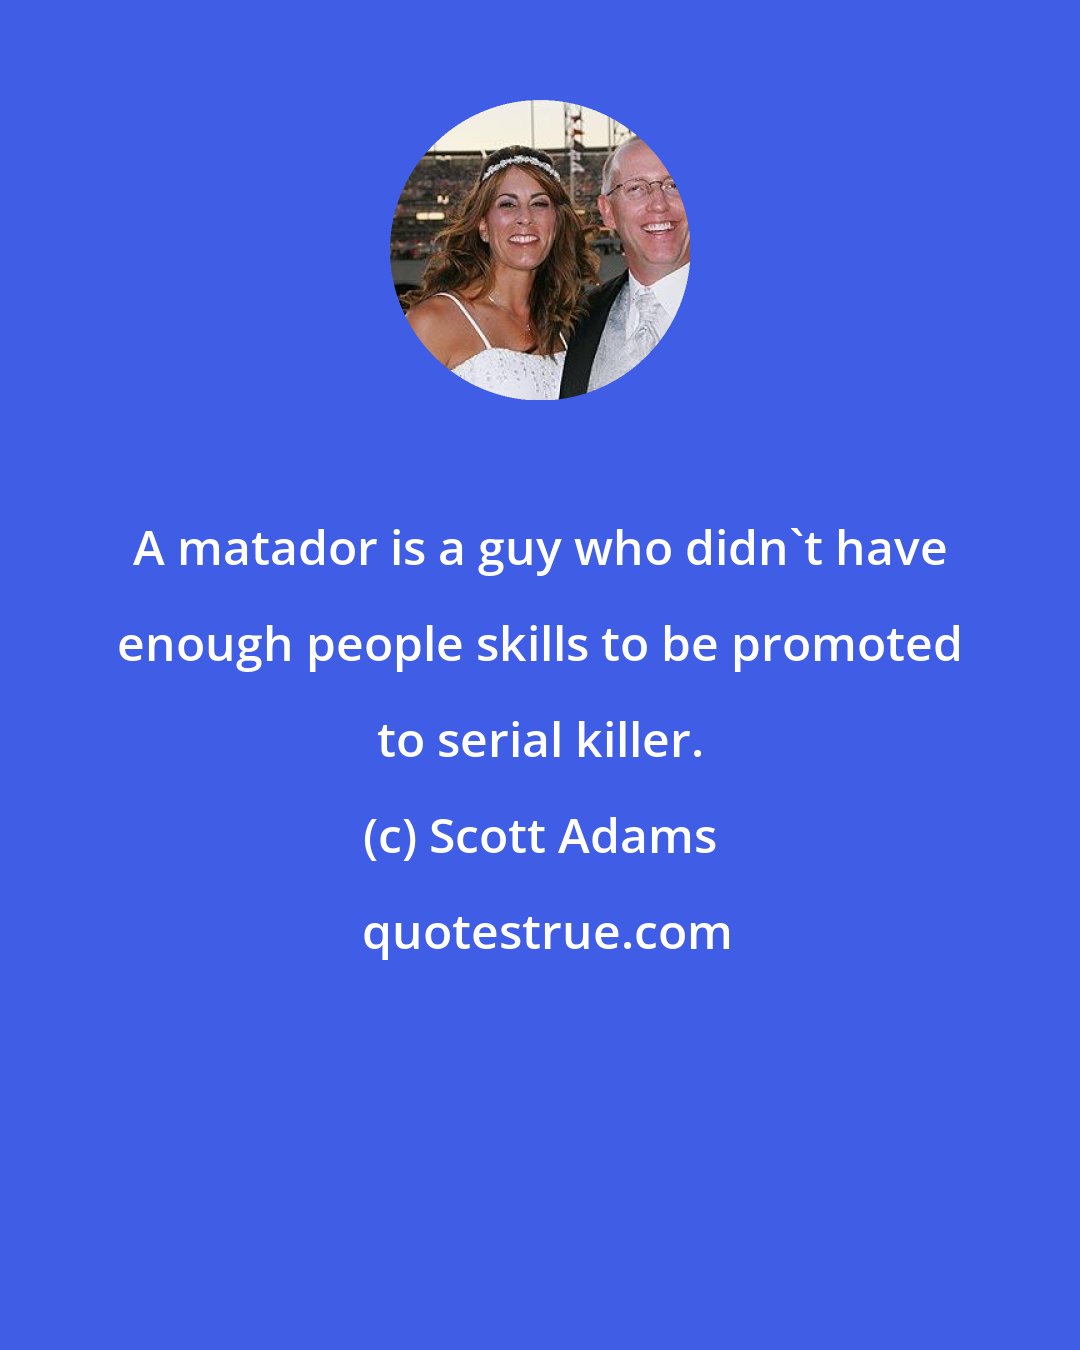 Scott Adams: A matador is a guy who didn't have enough people skills to be promoted to serial killer.